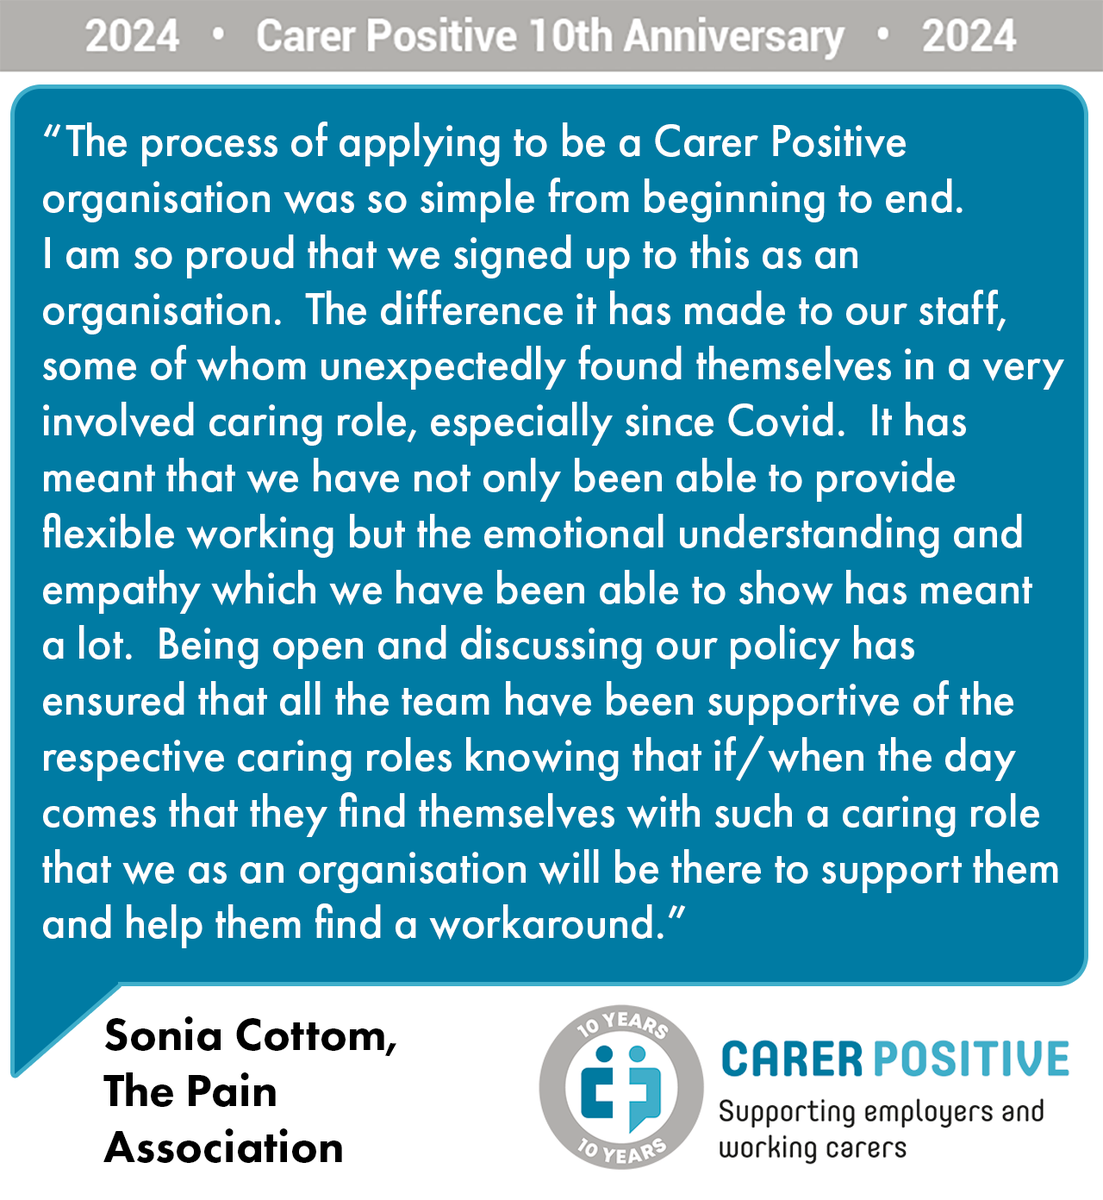 Thanks to the brilliant organisations who provided quotes about their experiences working with Carer Positive for our 10th Anniversary. This one comes from Sonia Cottom at The Pain Association. @PainAssocScot